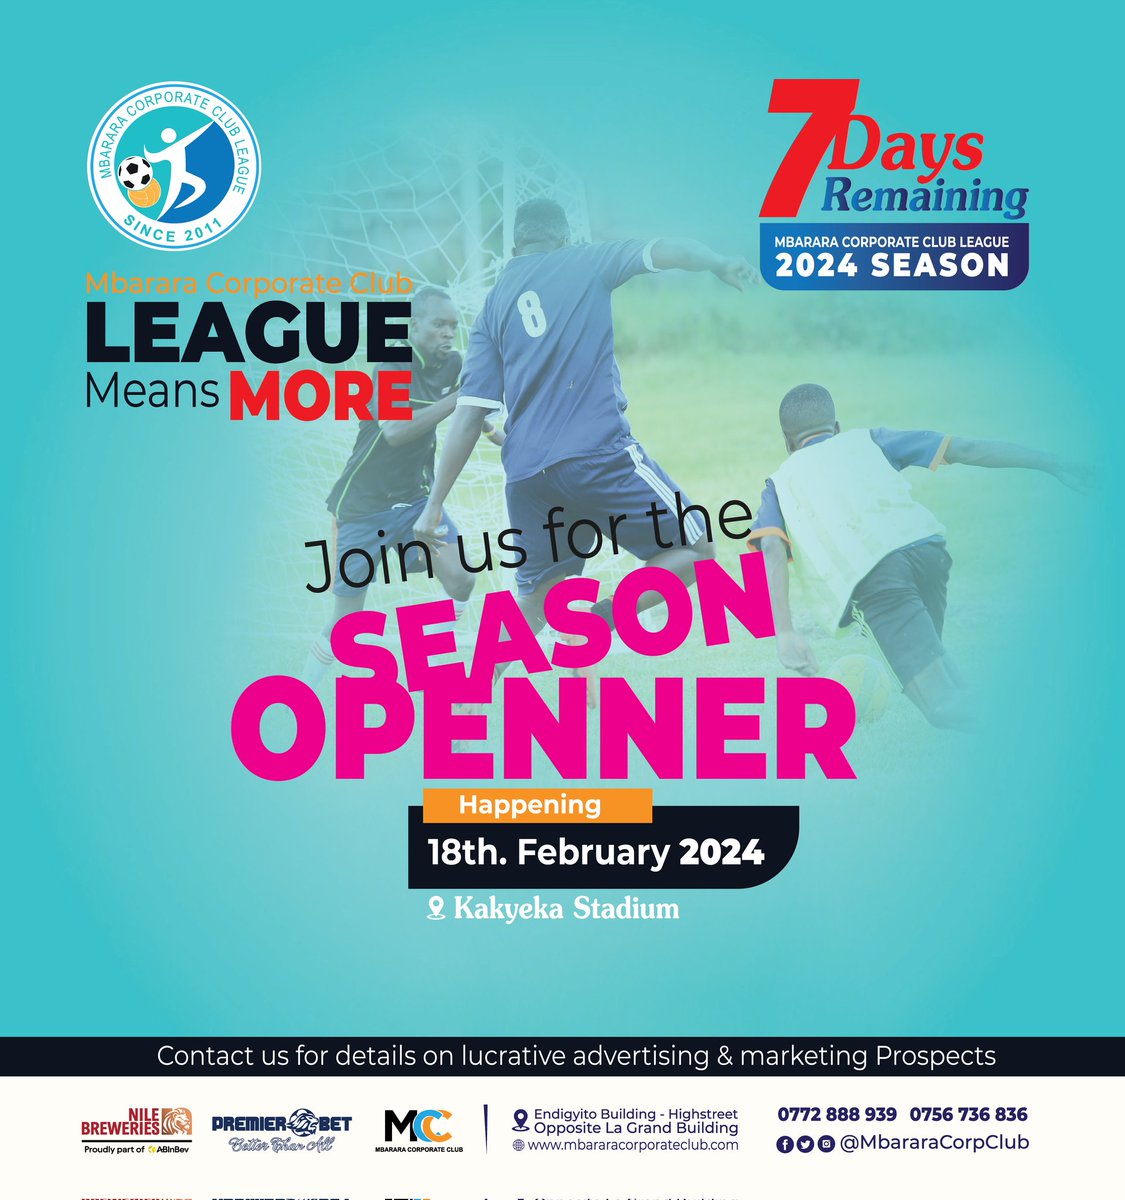 Just 7 days remaining,  Join us for the Season Openner, the 1st Out of #NBLMCCSeasob24. @MbararaCorpClub means more. See you next Sunday 18th February at Kakyeka Stadium. 
@NBLUganda @NileSpecial @CastleLiteUg @ClubPilsener